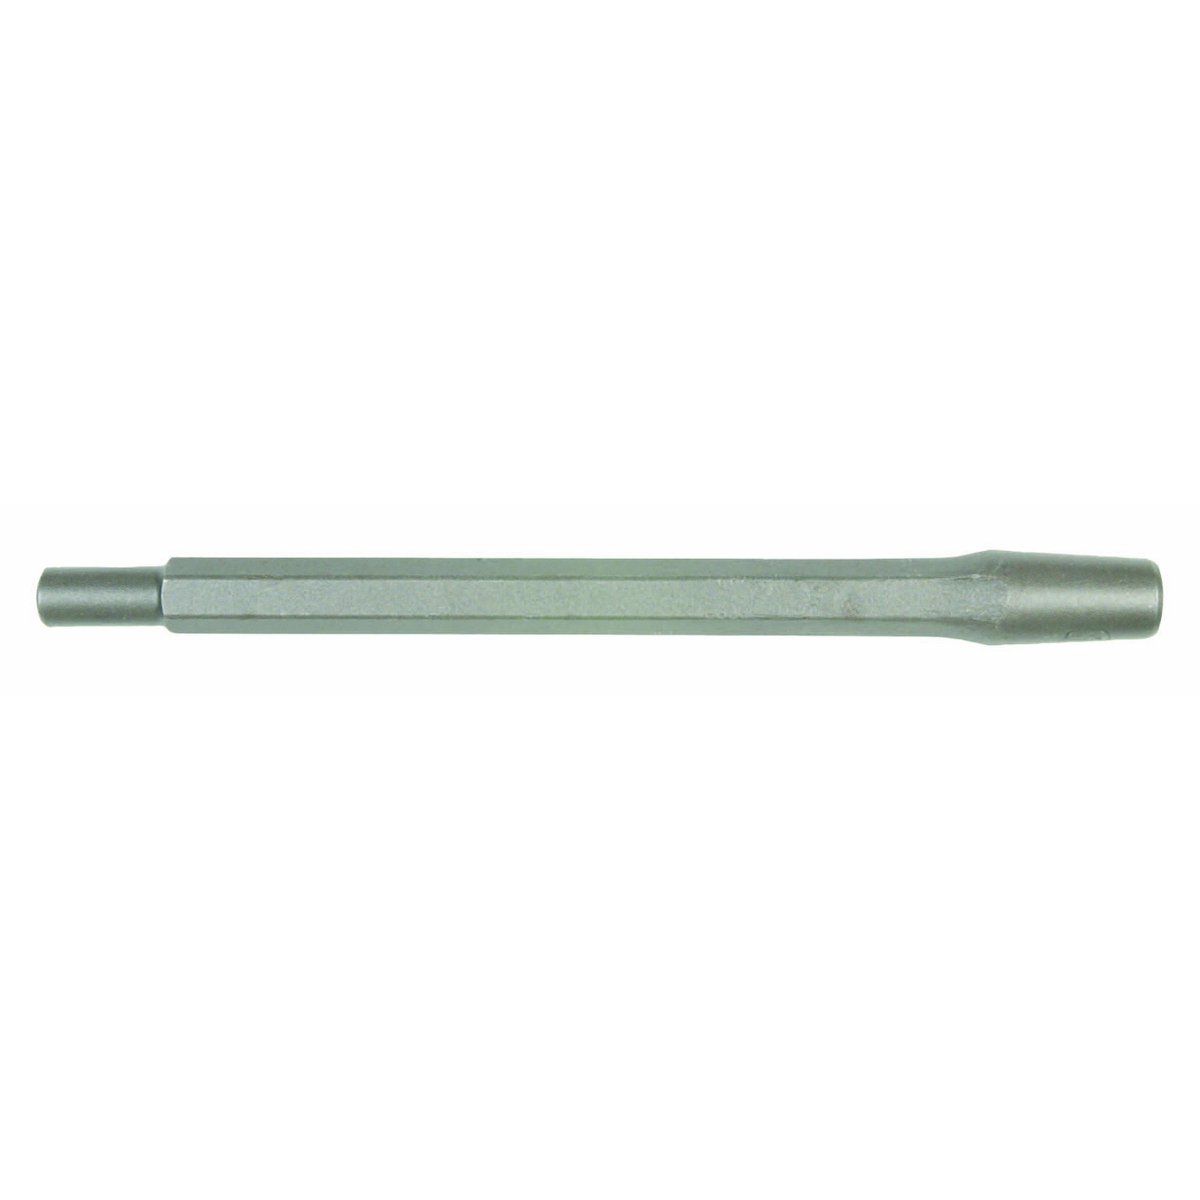 751547 SHANK FOR TAMPING PAD 400MM